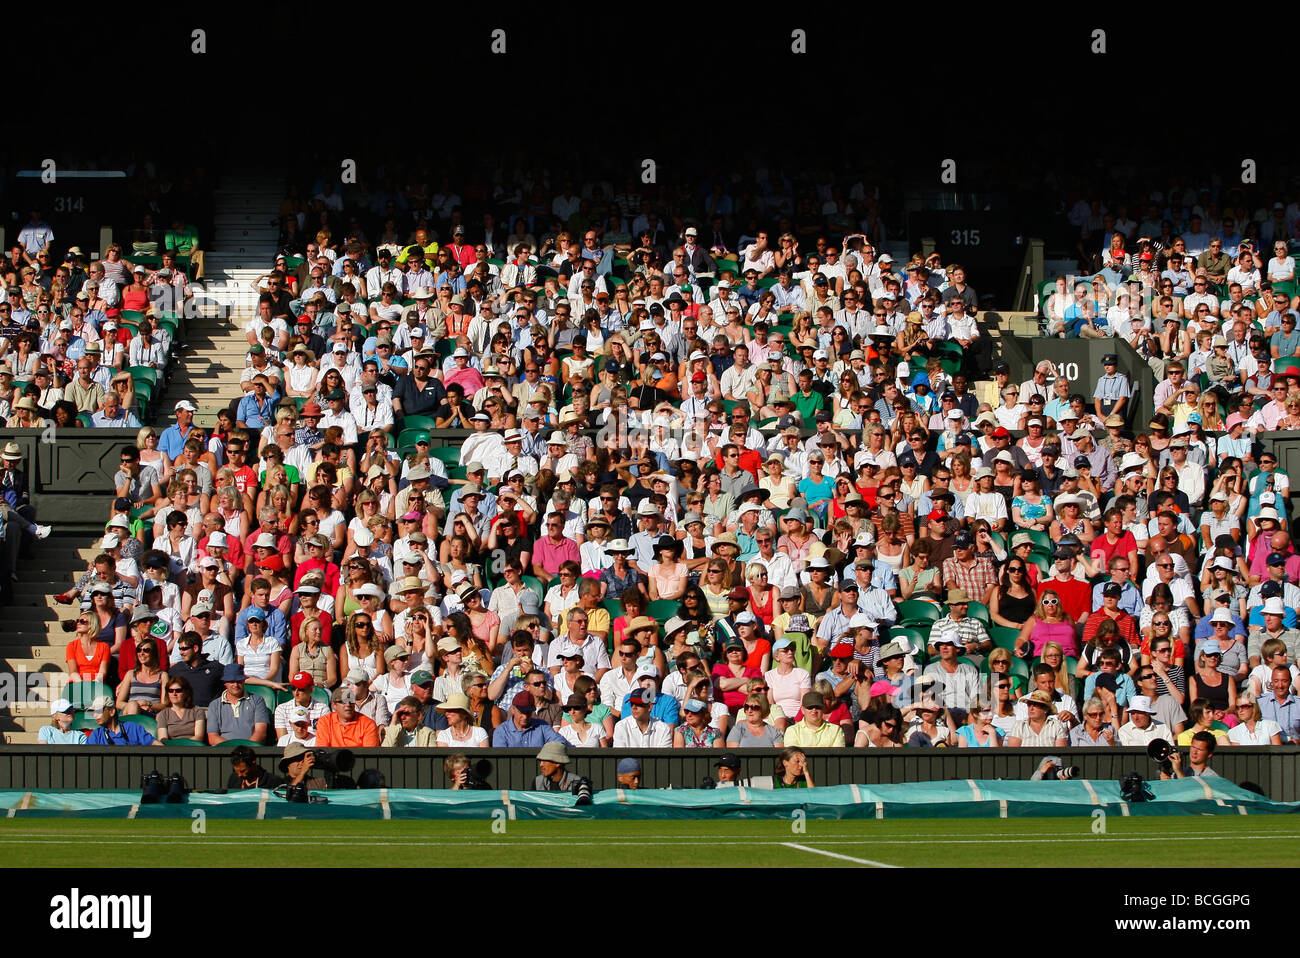 Spectators on Centre Court at the Wimbledon Championships Stock Photo